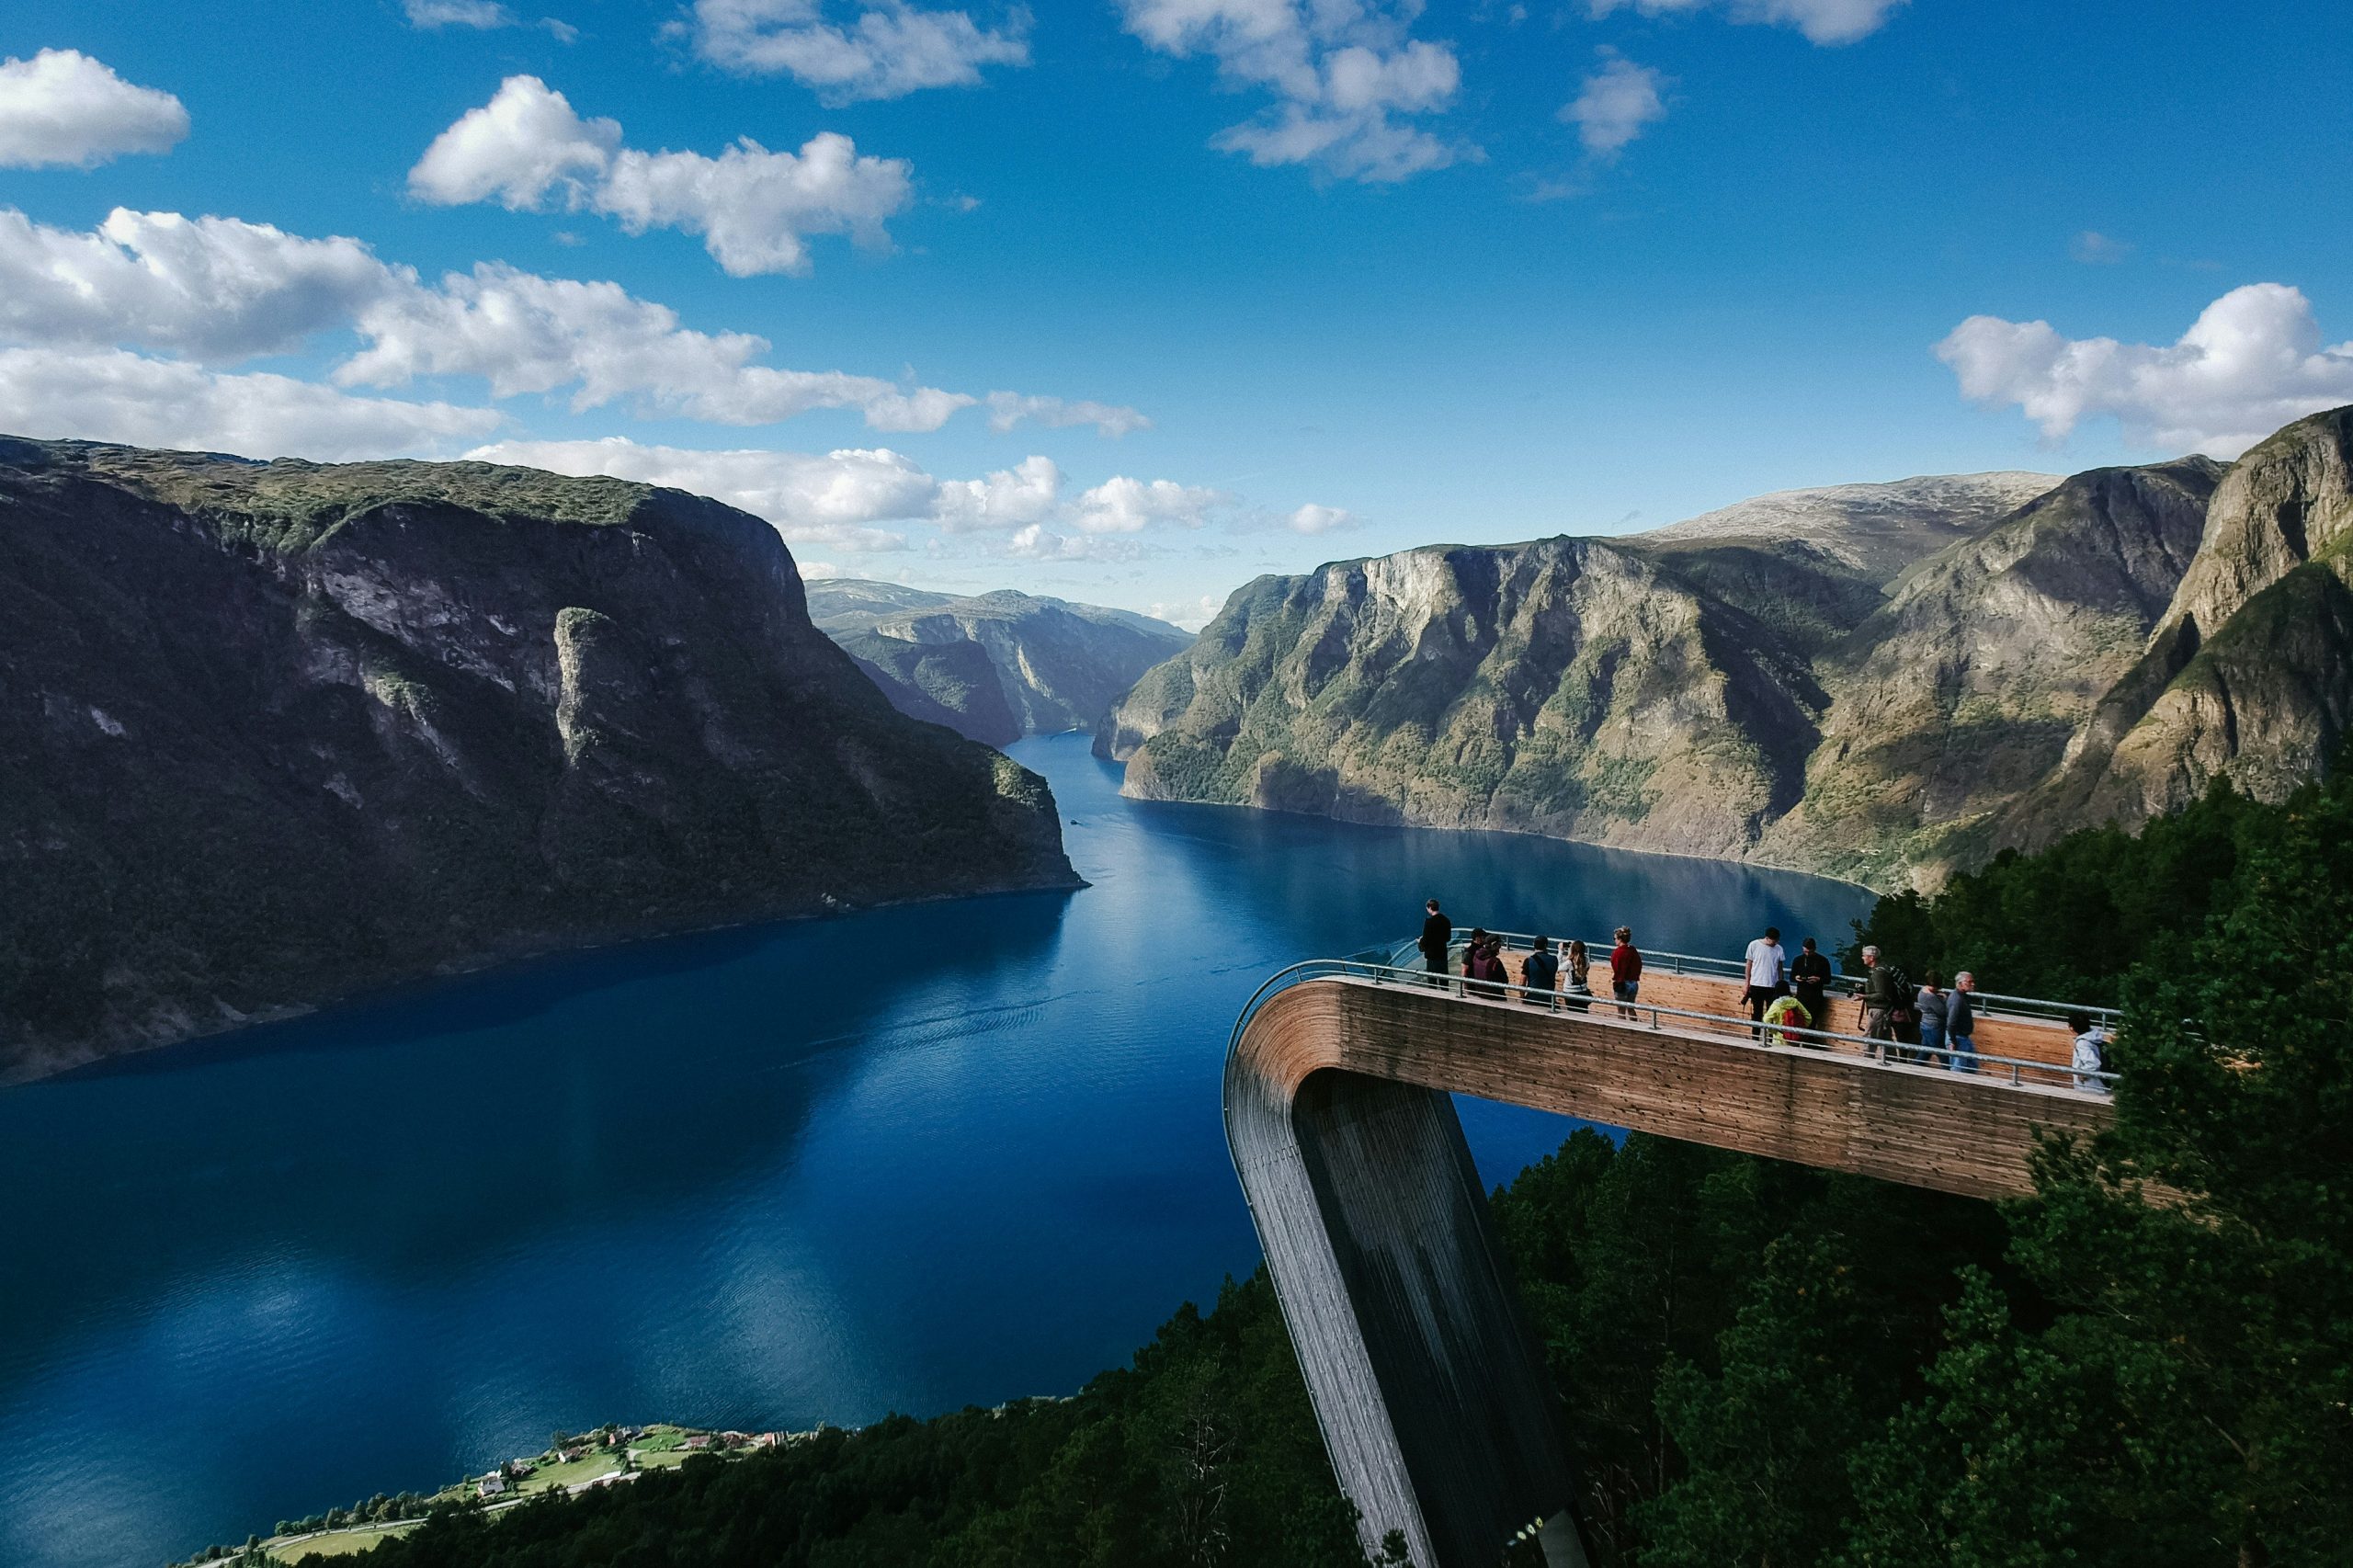 discover the breathtaking beauty of norway's fjords with our guided tours and cruises. explore the spectacular landscapes and pristine waters of this natural wonder.